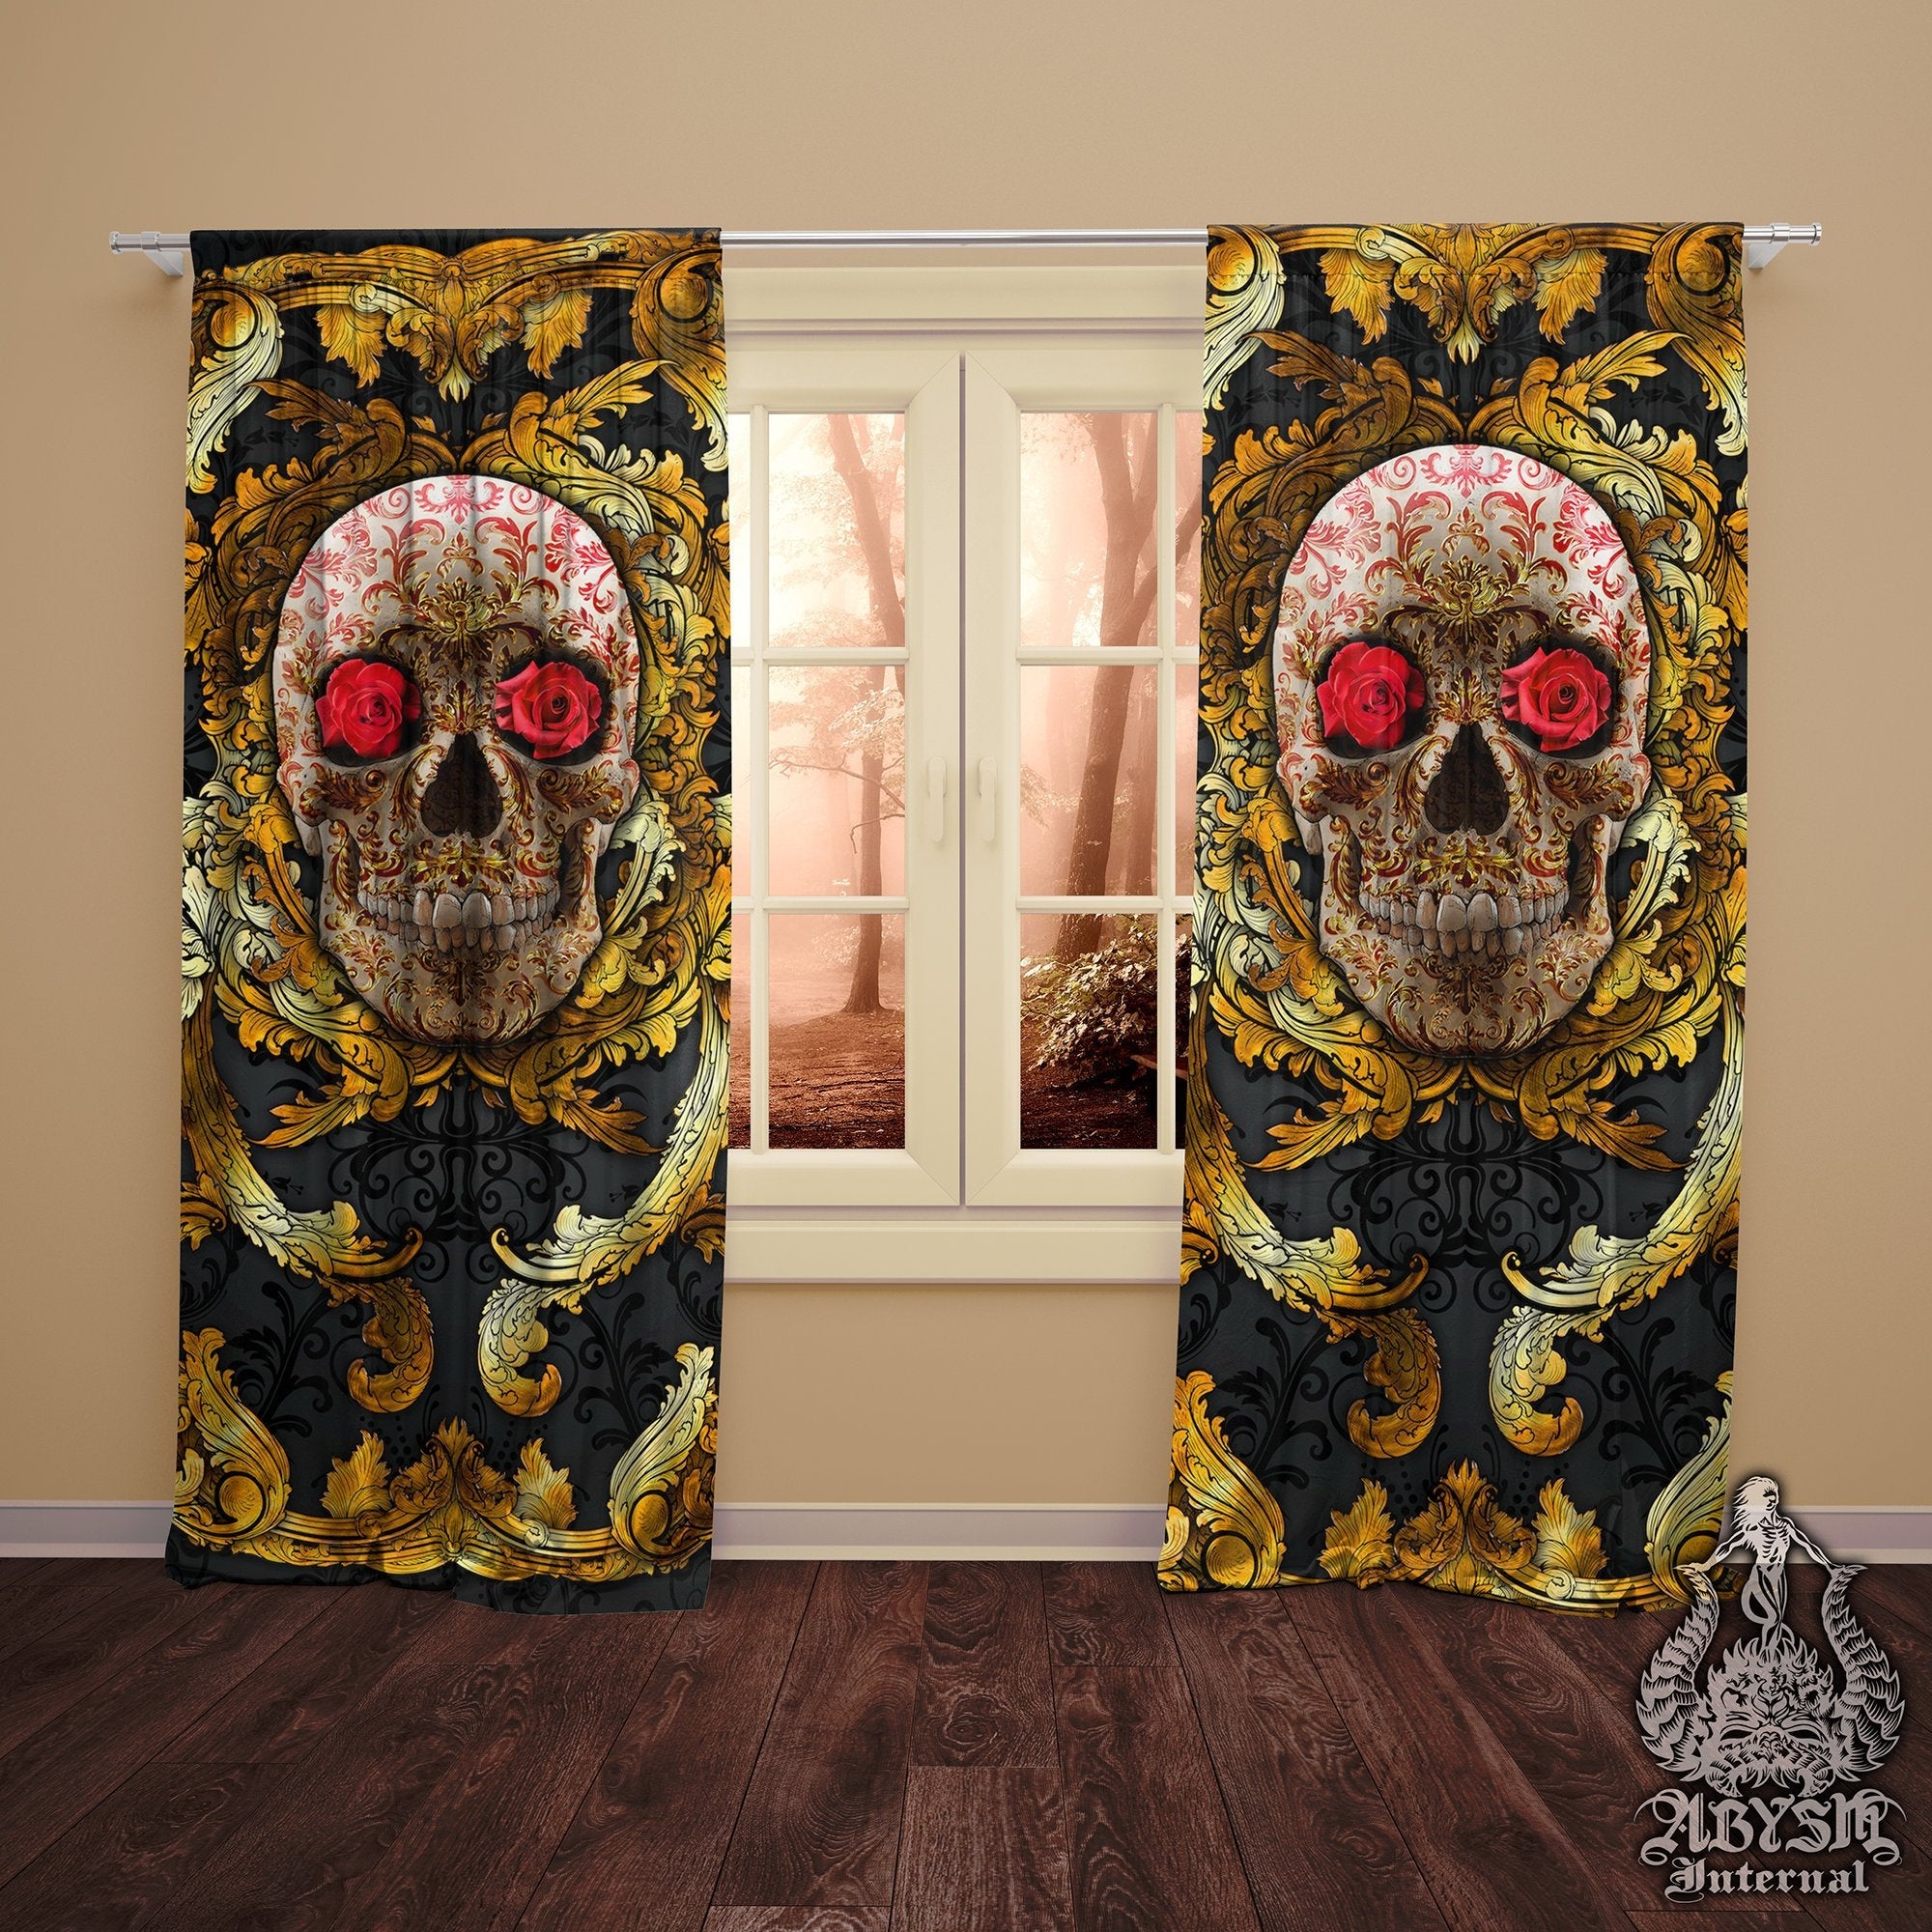 Skull Blackout Curtains, Long Window Panels, Macabre Art Print, Victorian Goth Home Decor - Gold & Red Roses - Abysm Internal